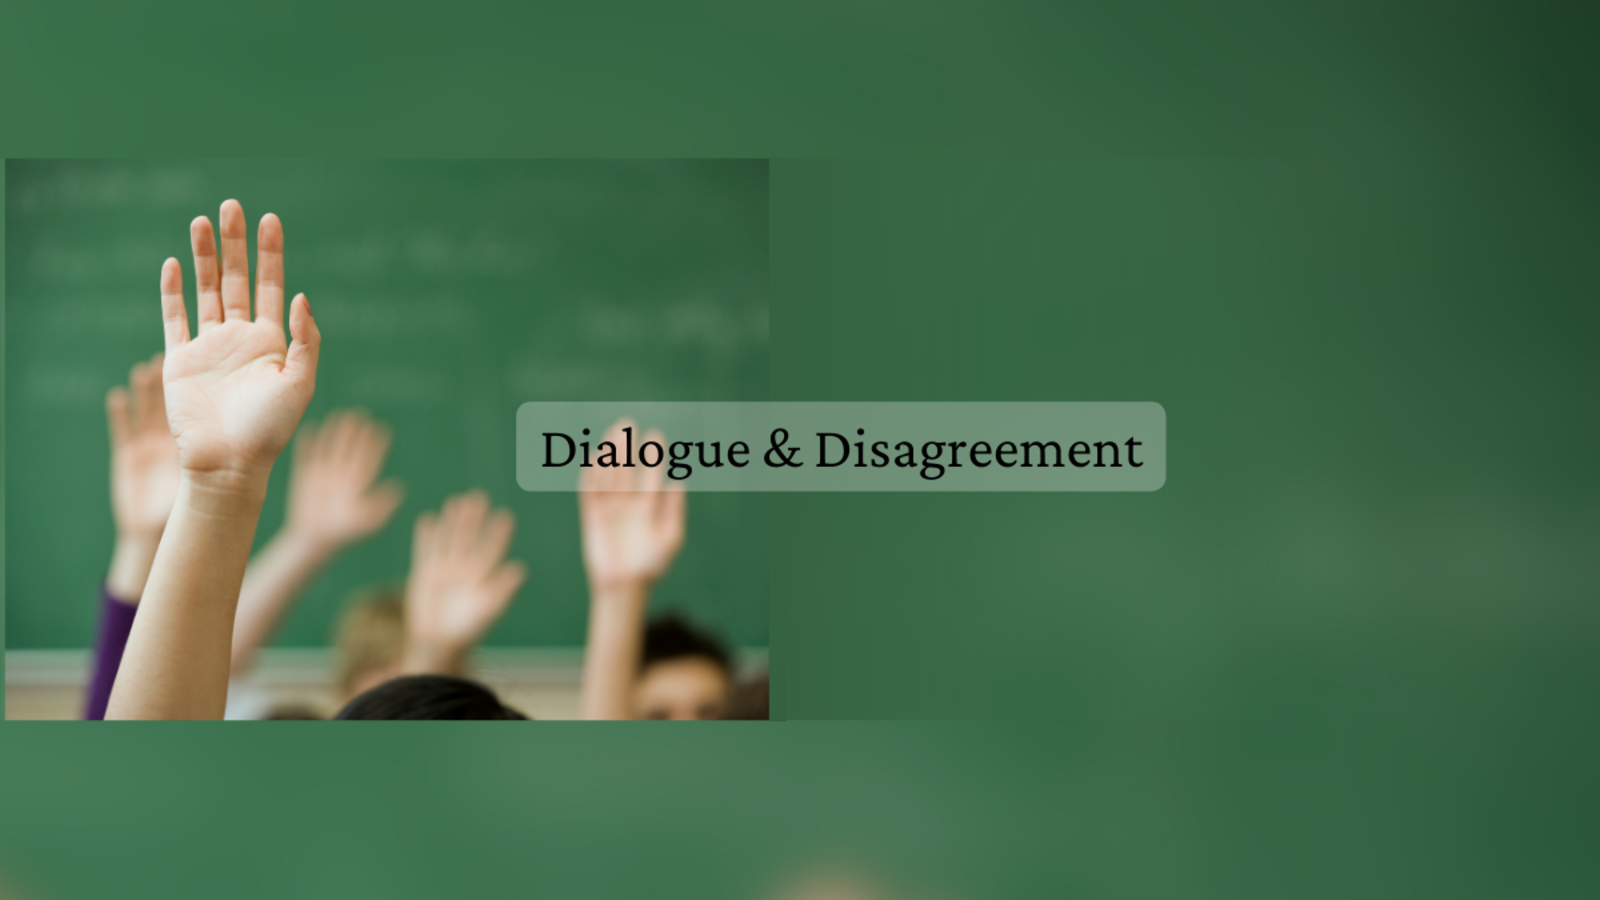 "Dialogue & Disagreement" on gray with raised hands.